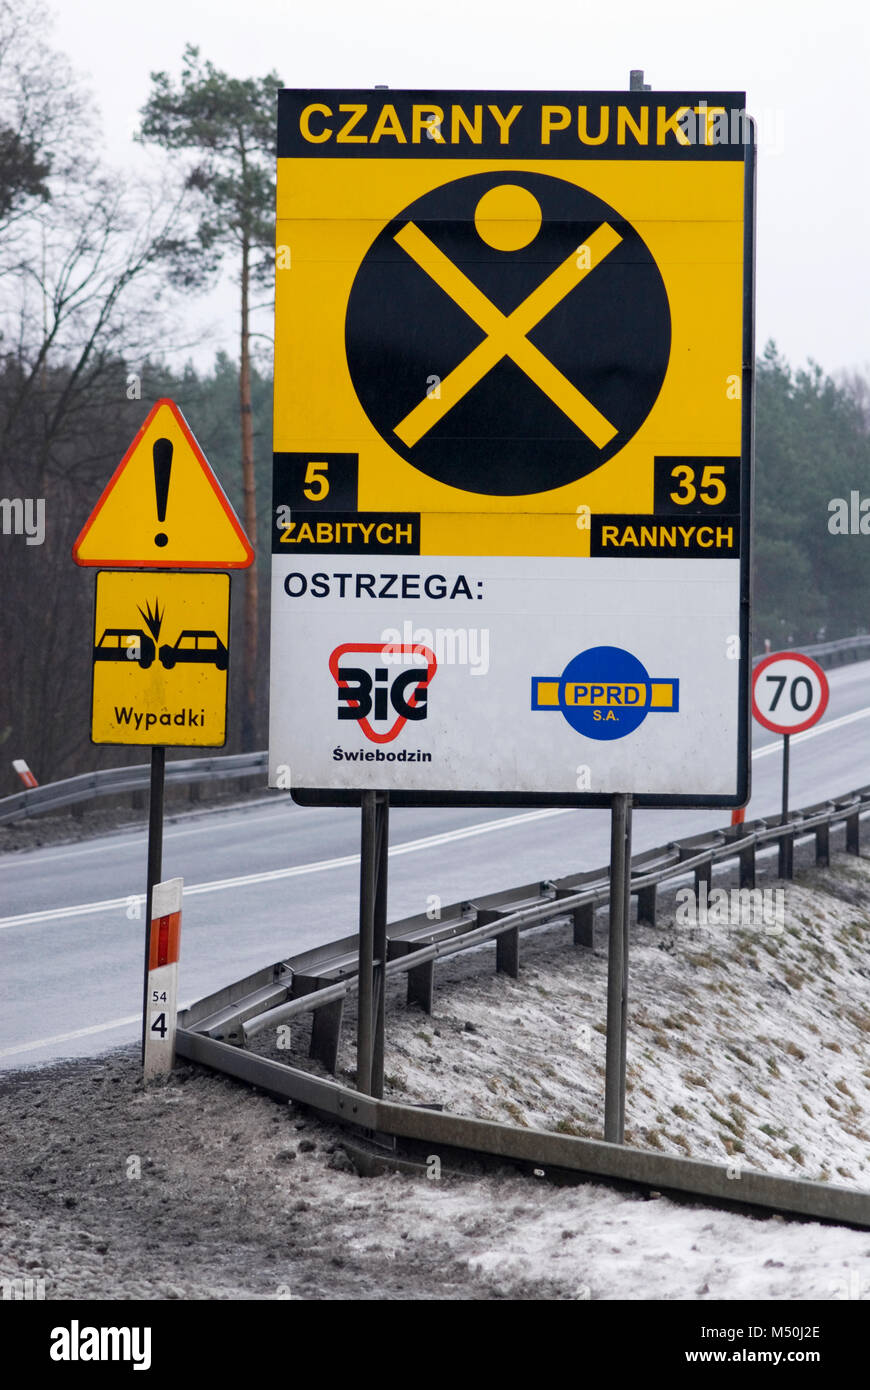 Accident blackspot sign on road the E30 in western Poland  The statistics say 5 dead and 35 injured at this location Picture taken January 2007 Stock Photo